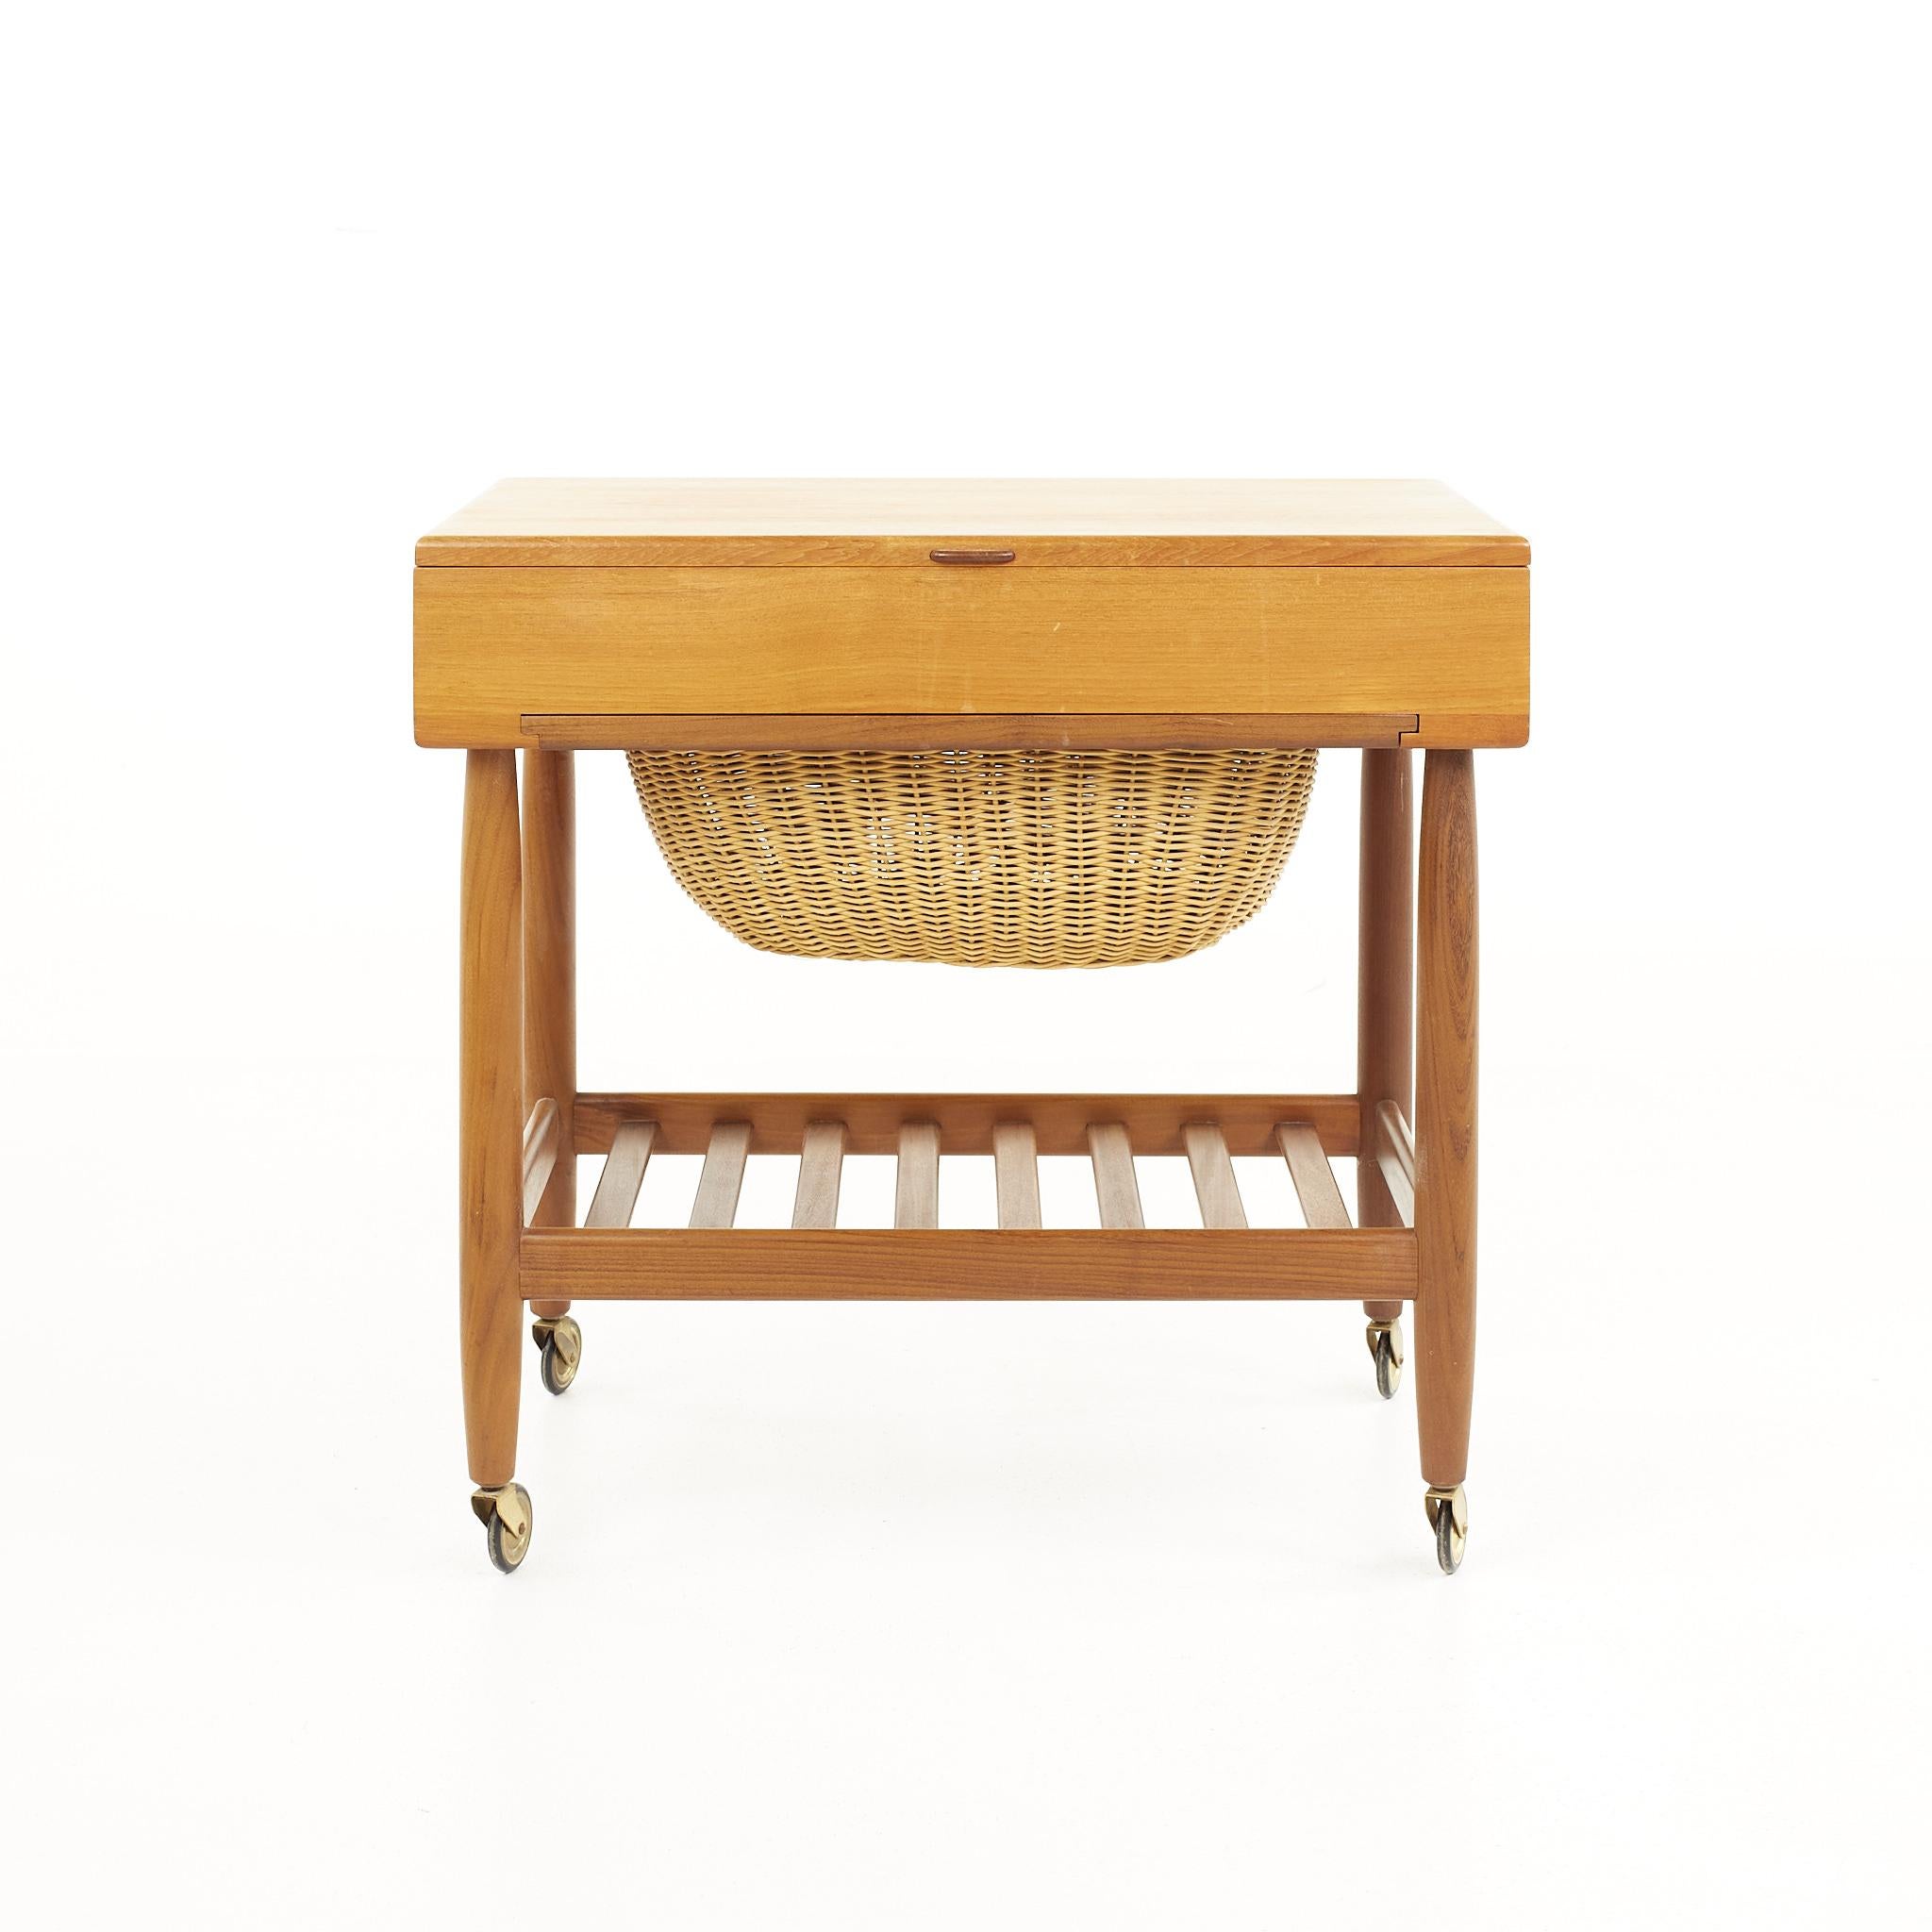 Vitzé mid-century teak sewing table with basket

The table measures: 23.5 wide x 15.75 deep x 23 inches high

All pieces of furniture can be had in what we call restored vintage condition. That means the piece is restored upon purchase so it’s